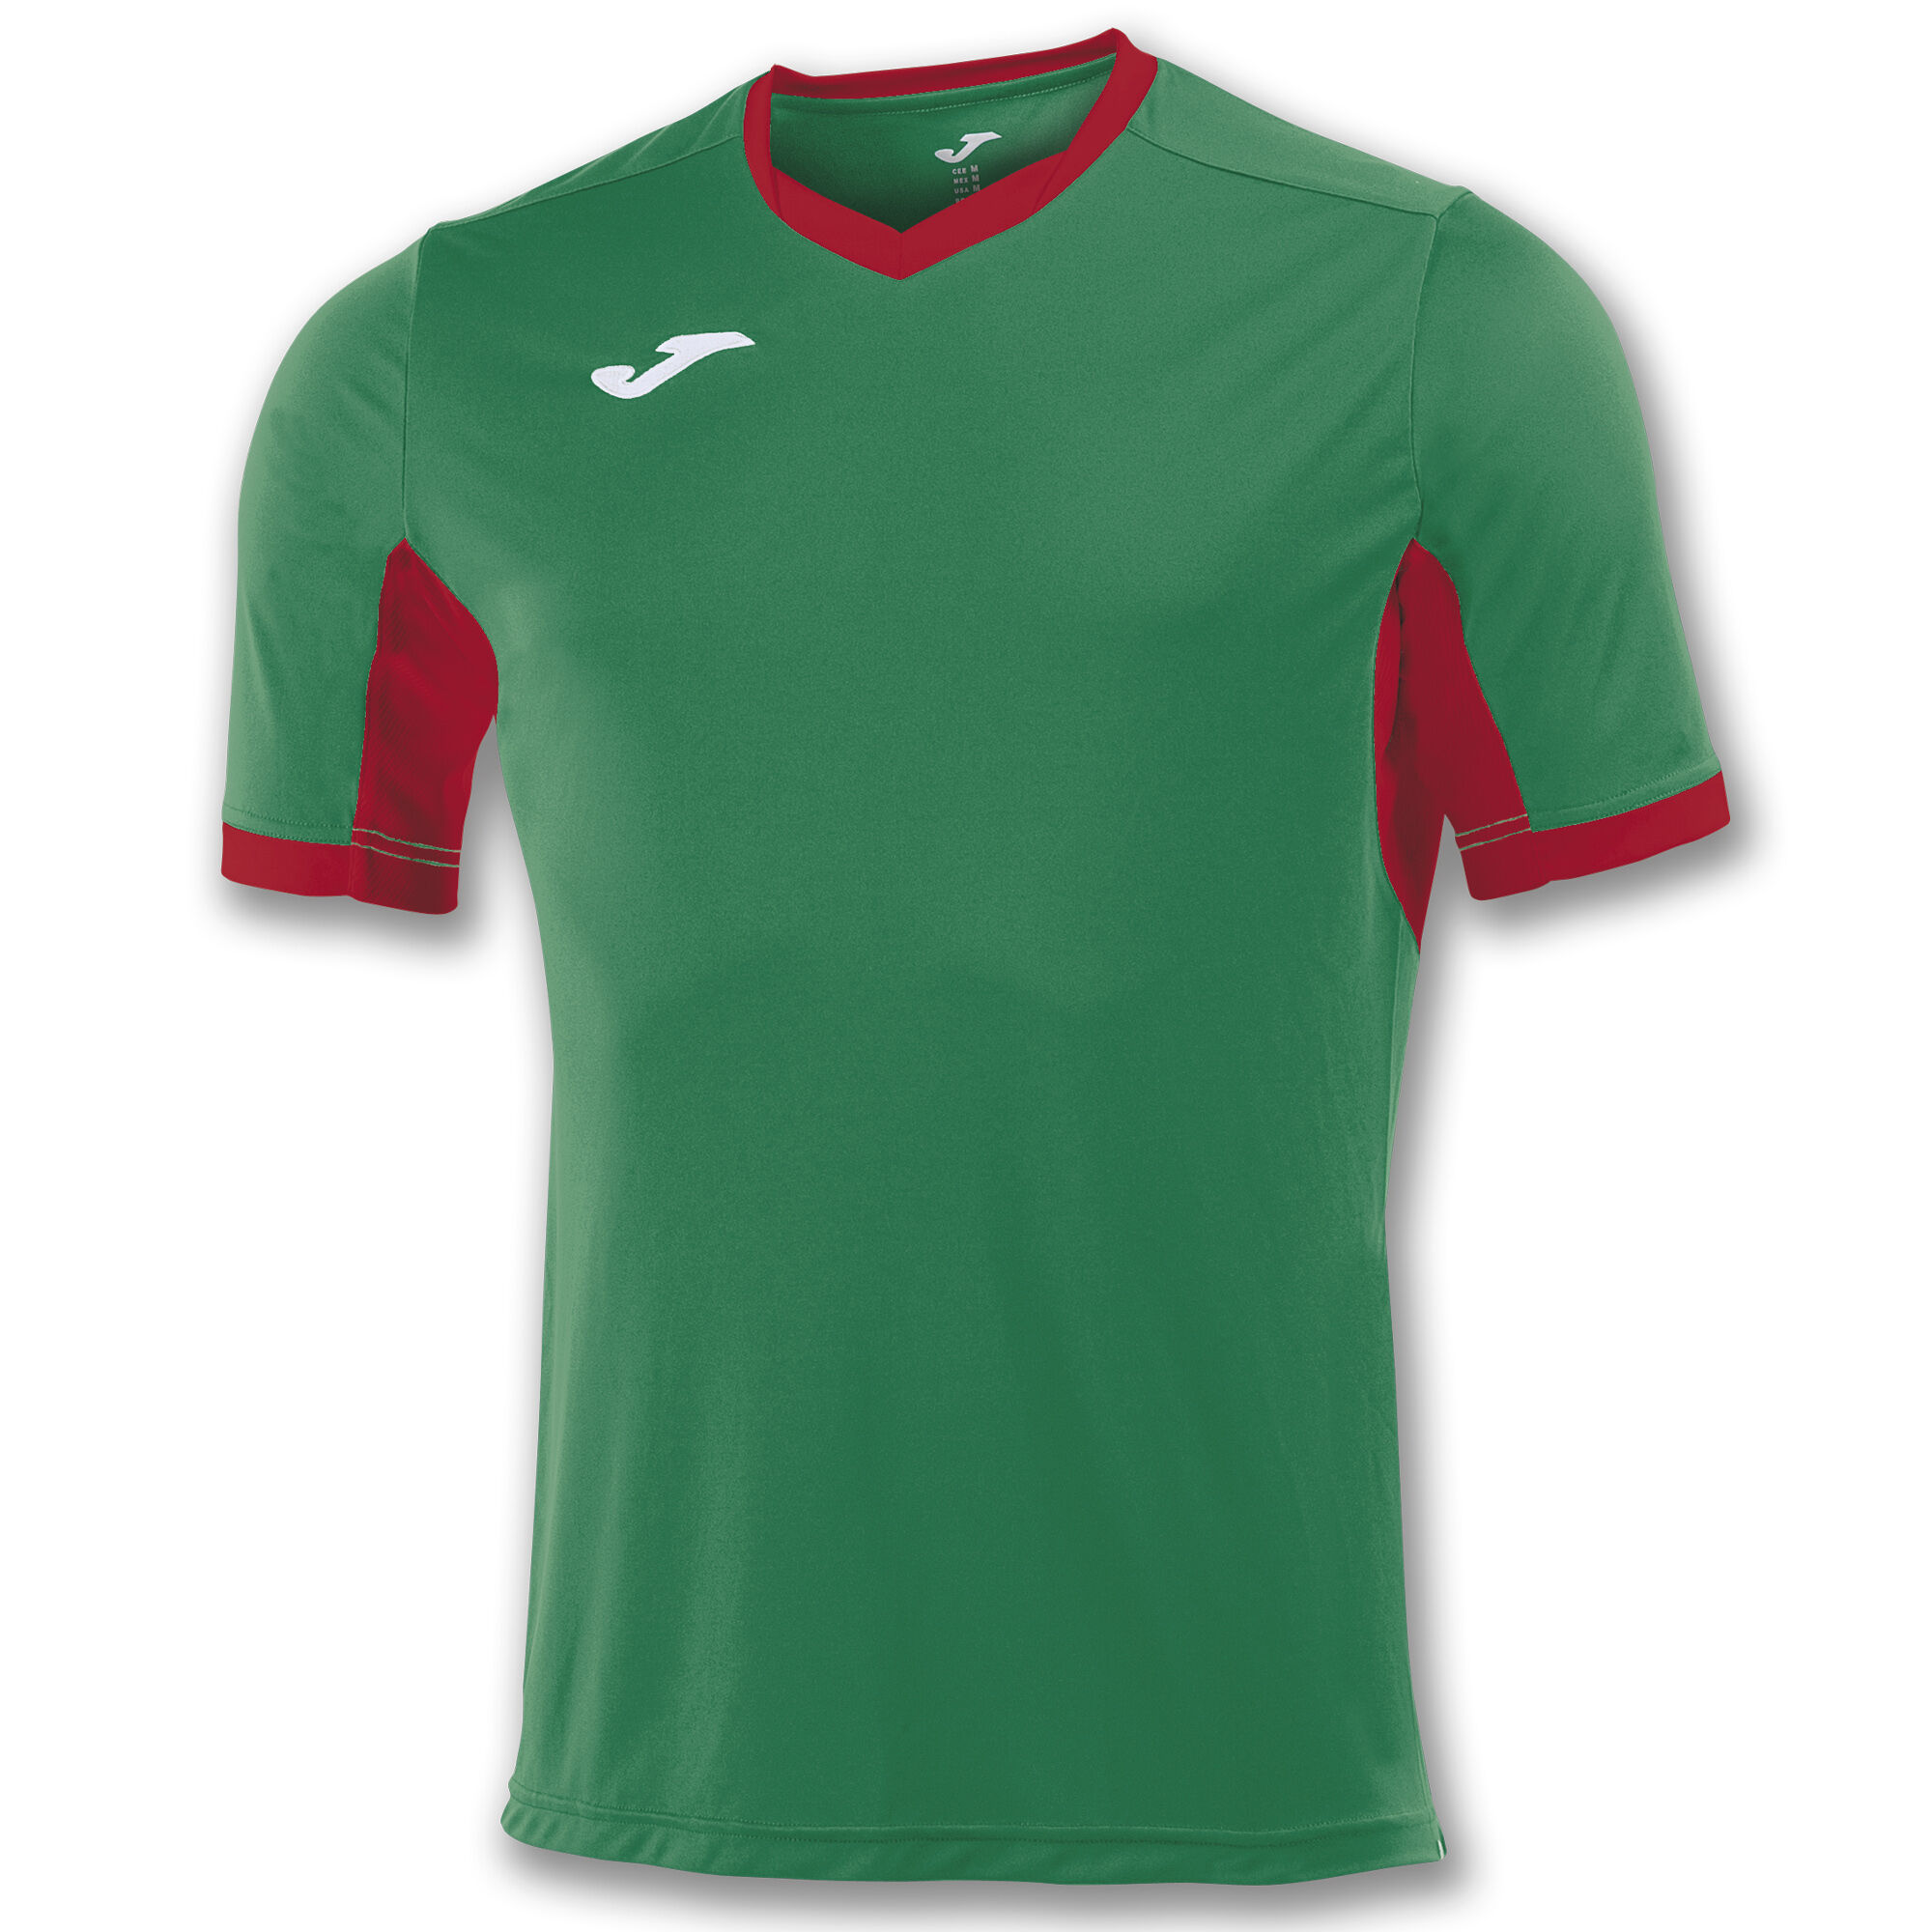 MAILLOT MANCHES COURTES HOMME CHAMPIONSHIP IV VERT ROUGE